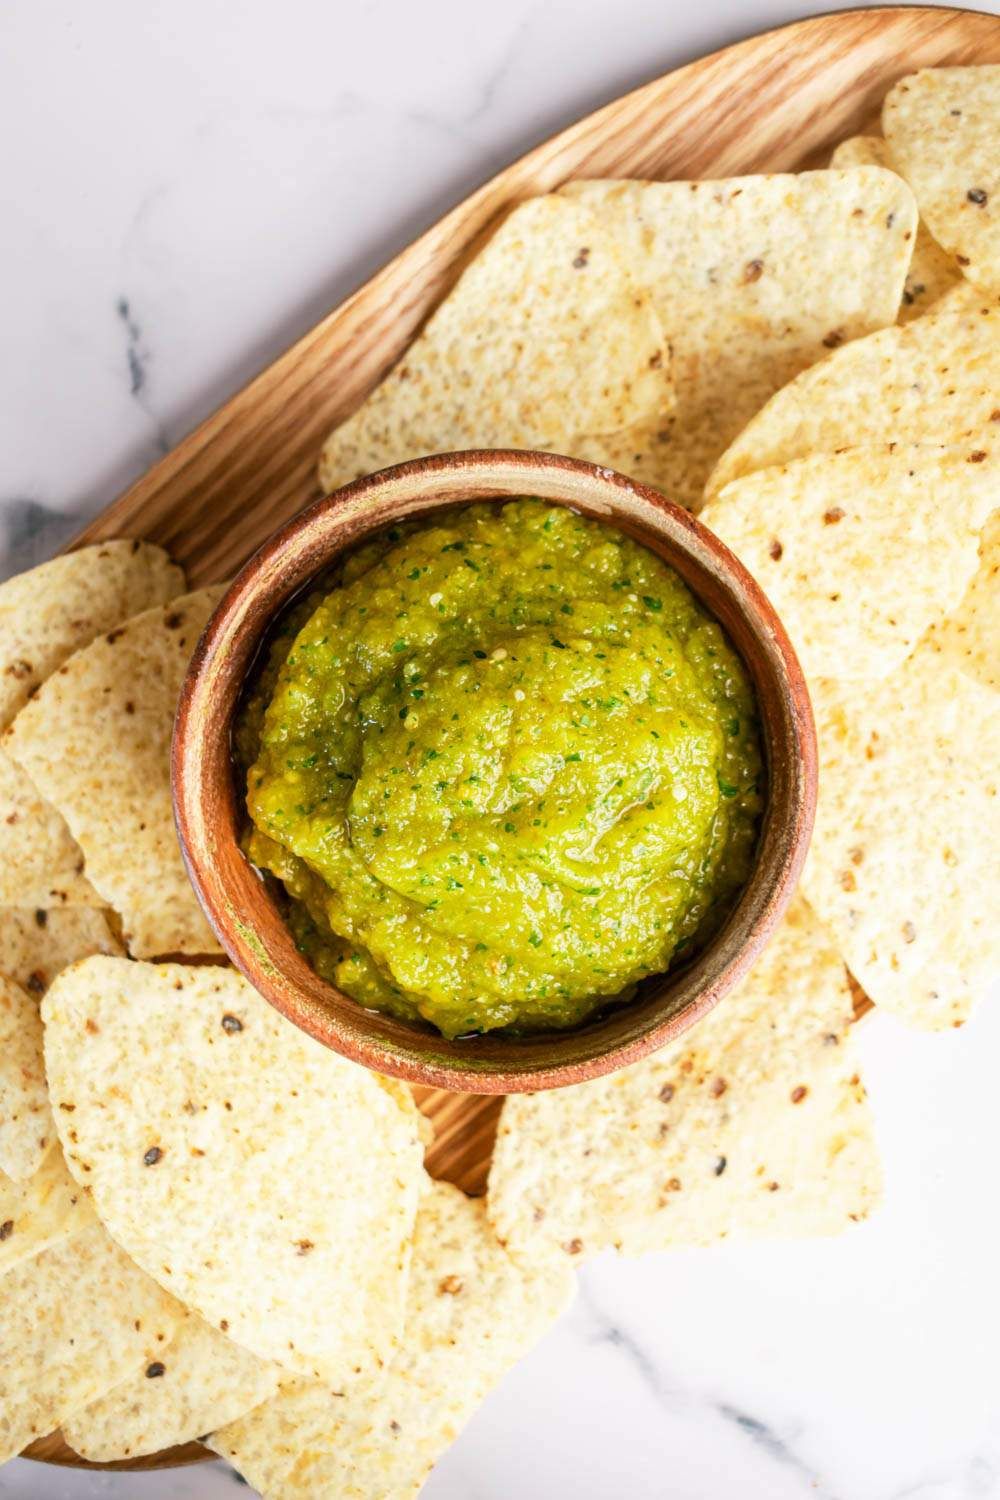 Tomatillo green salsa verde in a small bowl with tortilla chips.